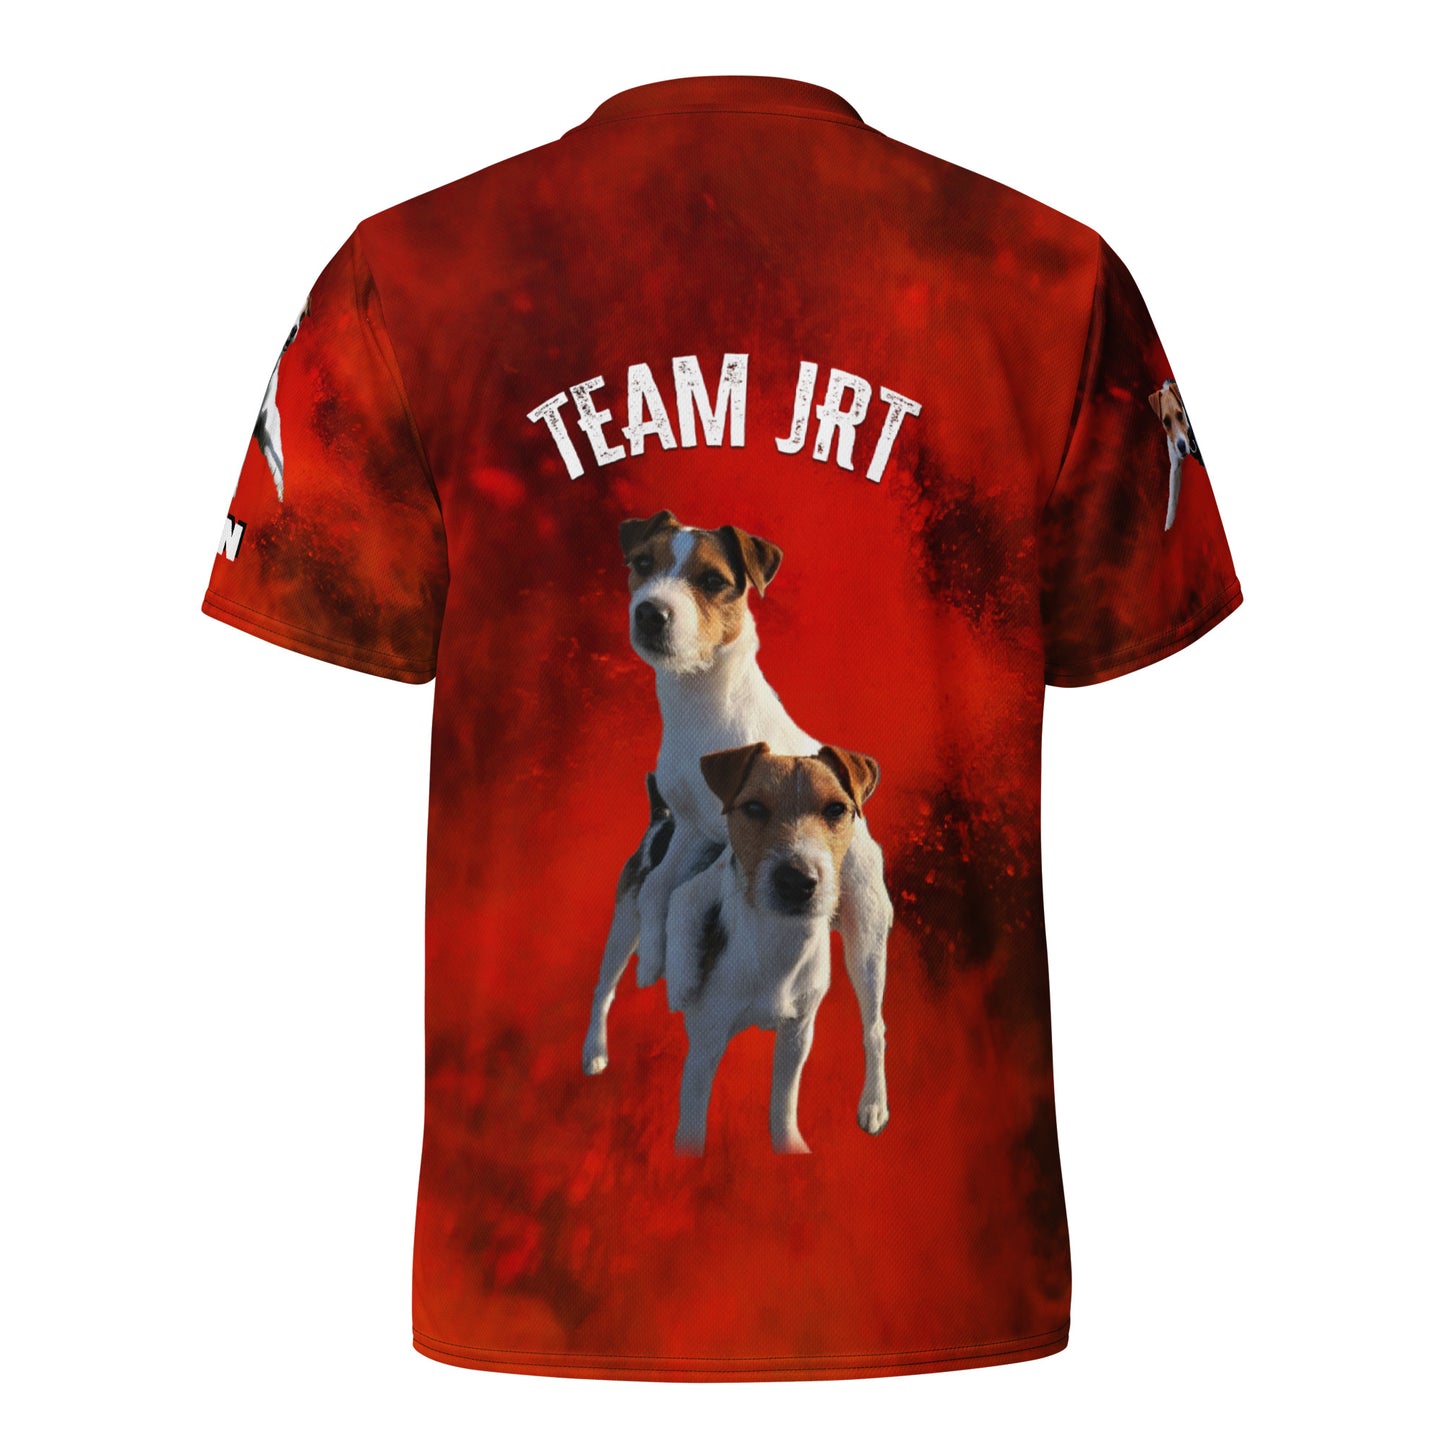 TEAM JRT Recycled unisex sports jersey